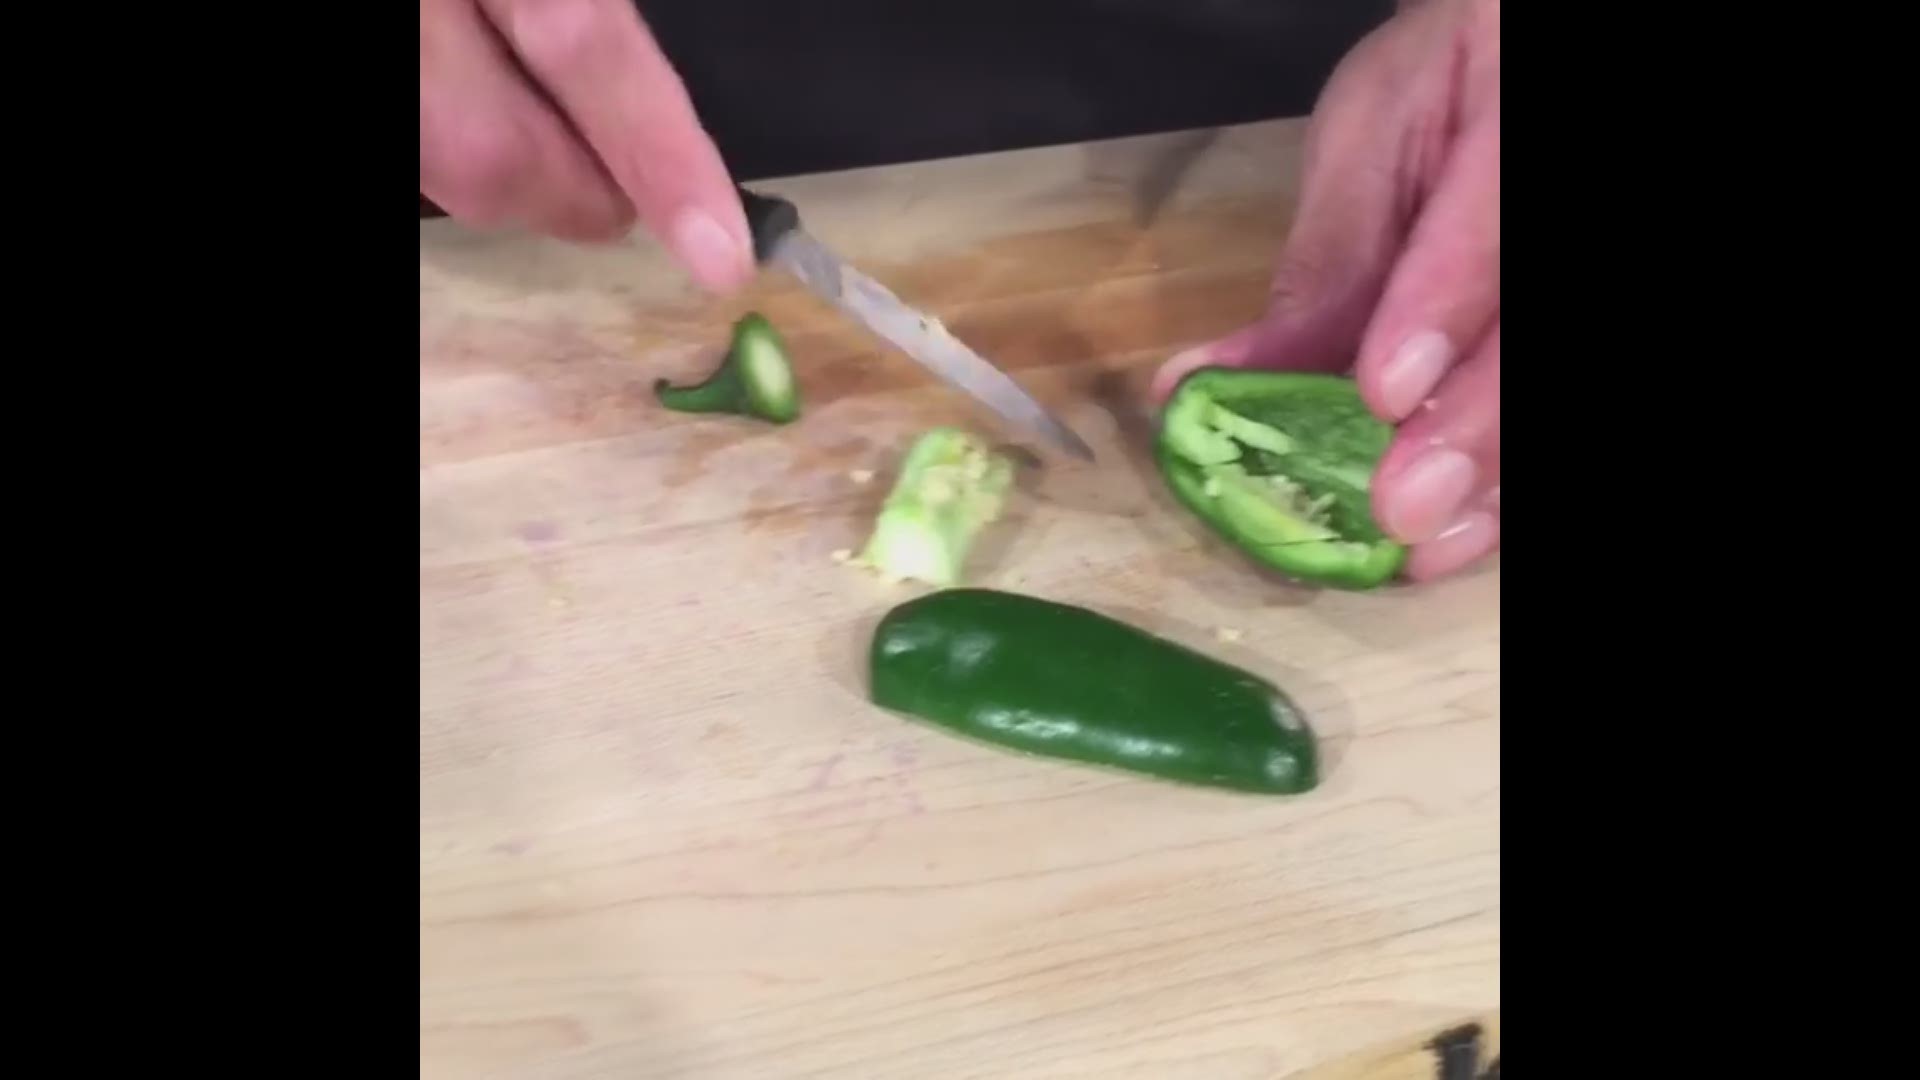 How to cut and seed a Jalapeño